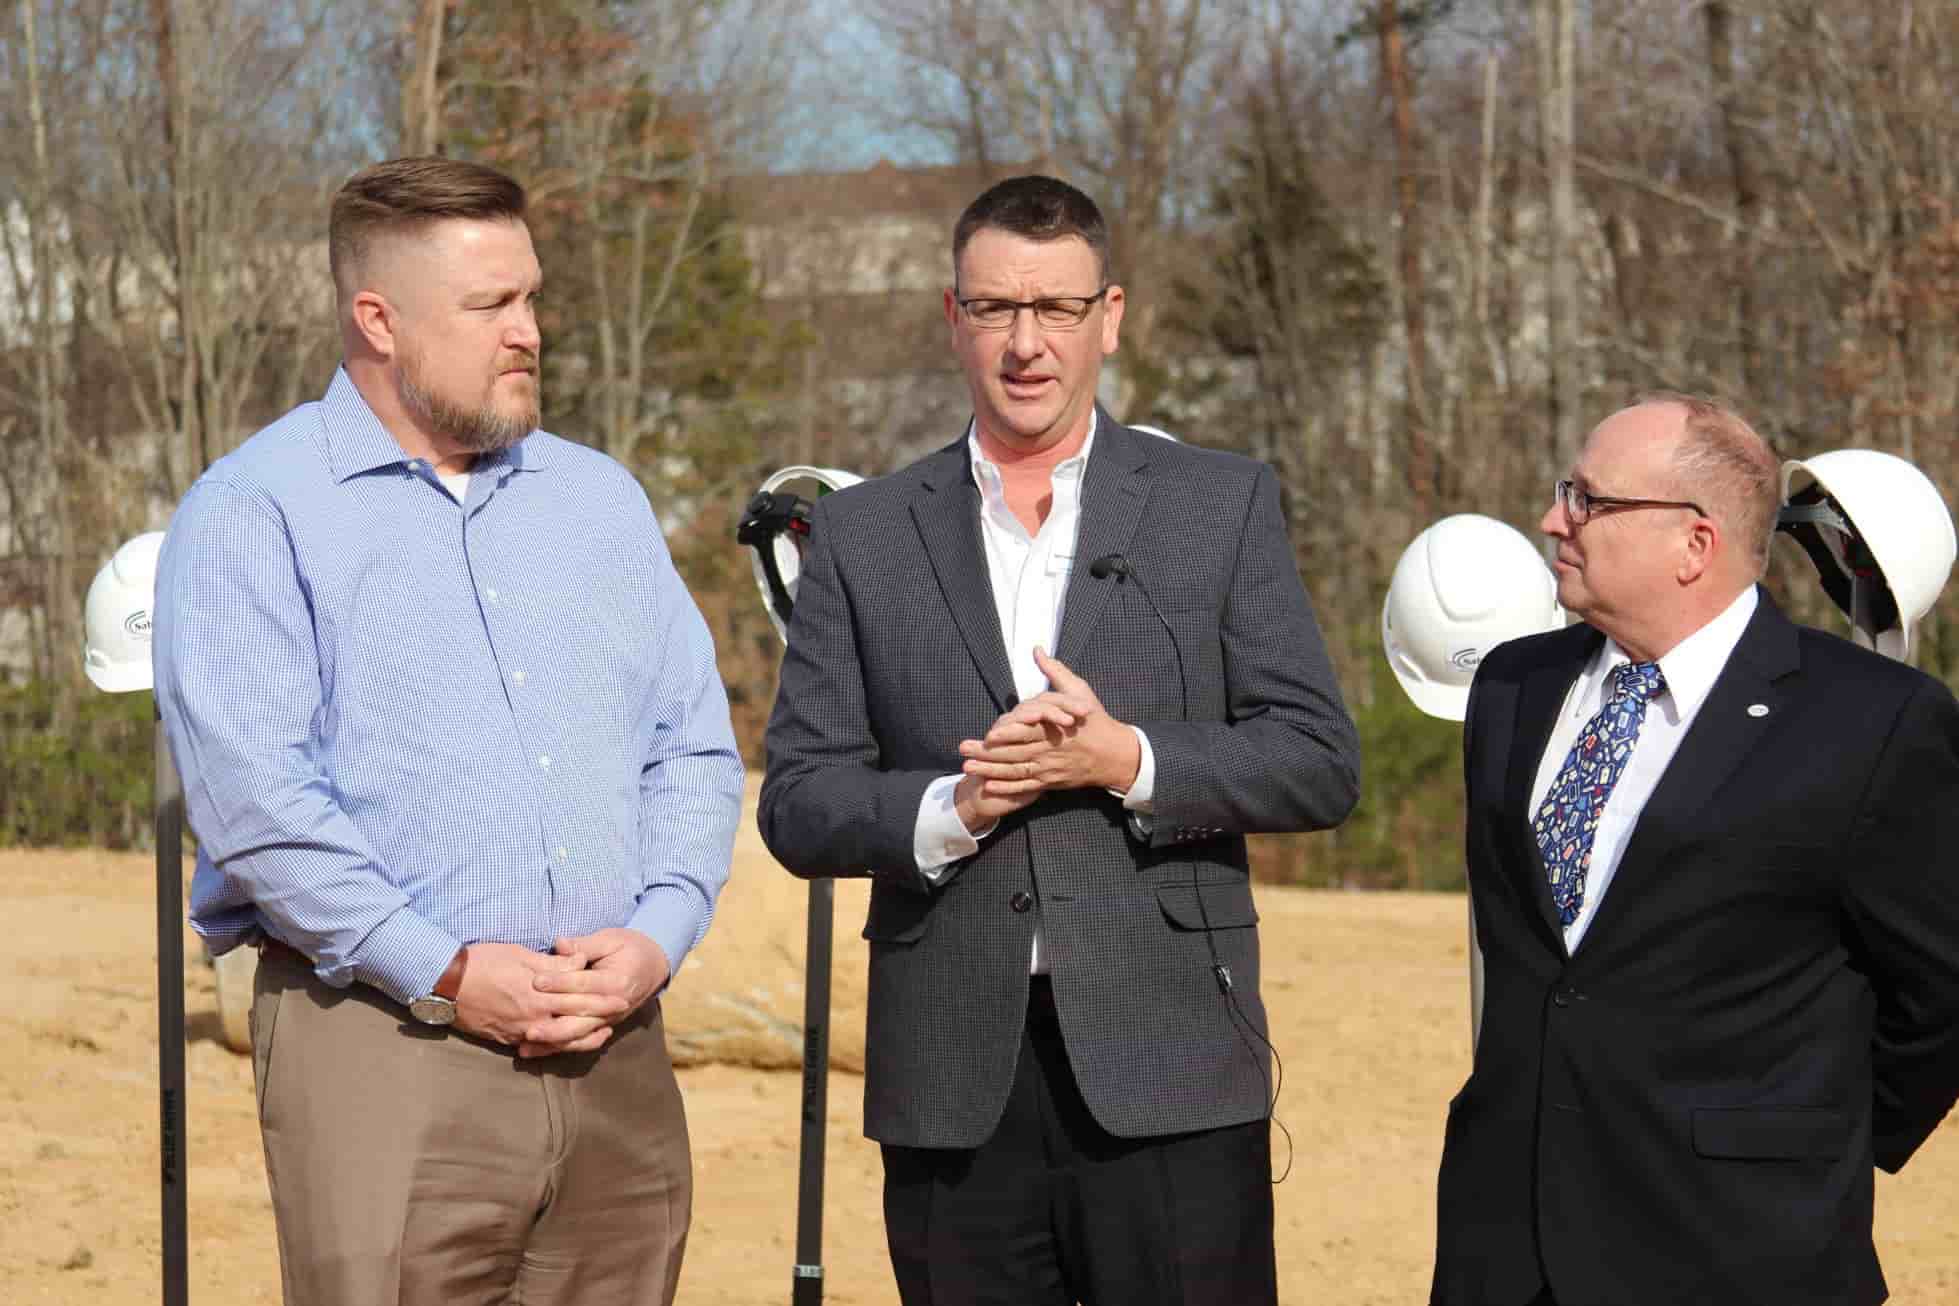 Executives from Saber Healthcare Group joined local officials to break ground on Saber’s new healthcare facility, Berea Health & Rehabilitation Center, in Fredericksburg.